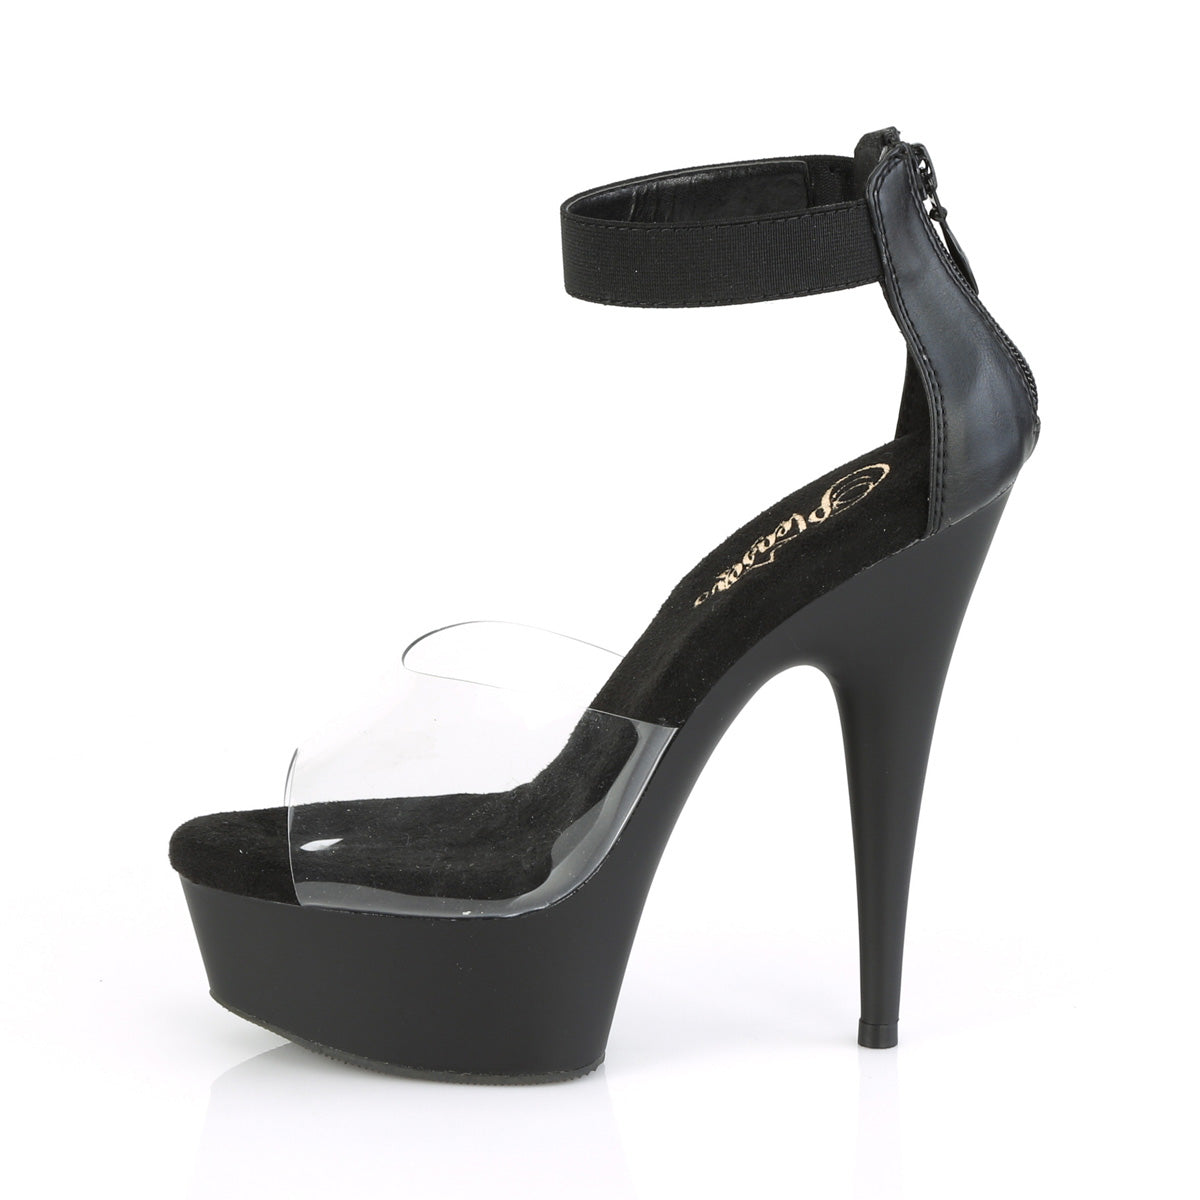 DELIGHT-624 Pleaser Pole Dancing Shoes 6 Inch Inch Heel Pleasers - Sexy Shoes Pole Dance Heels